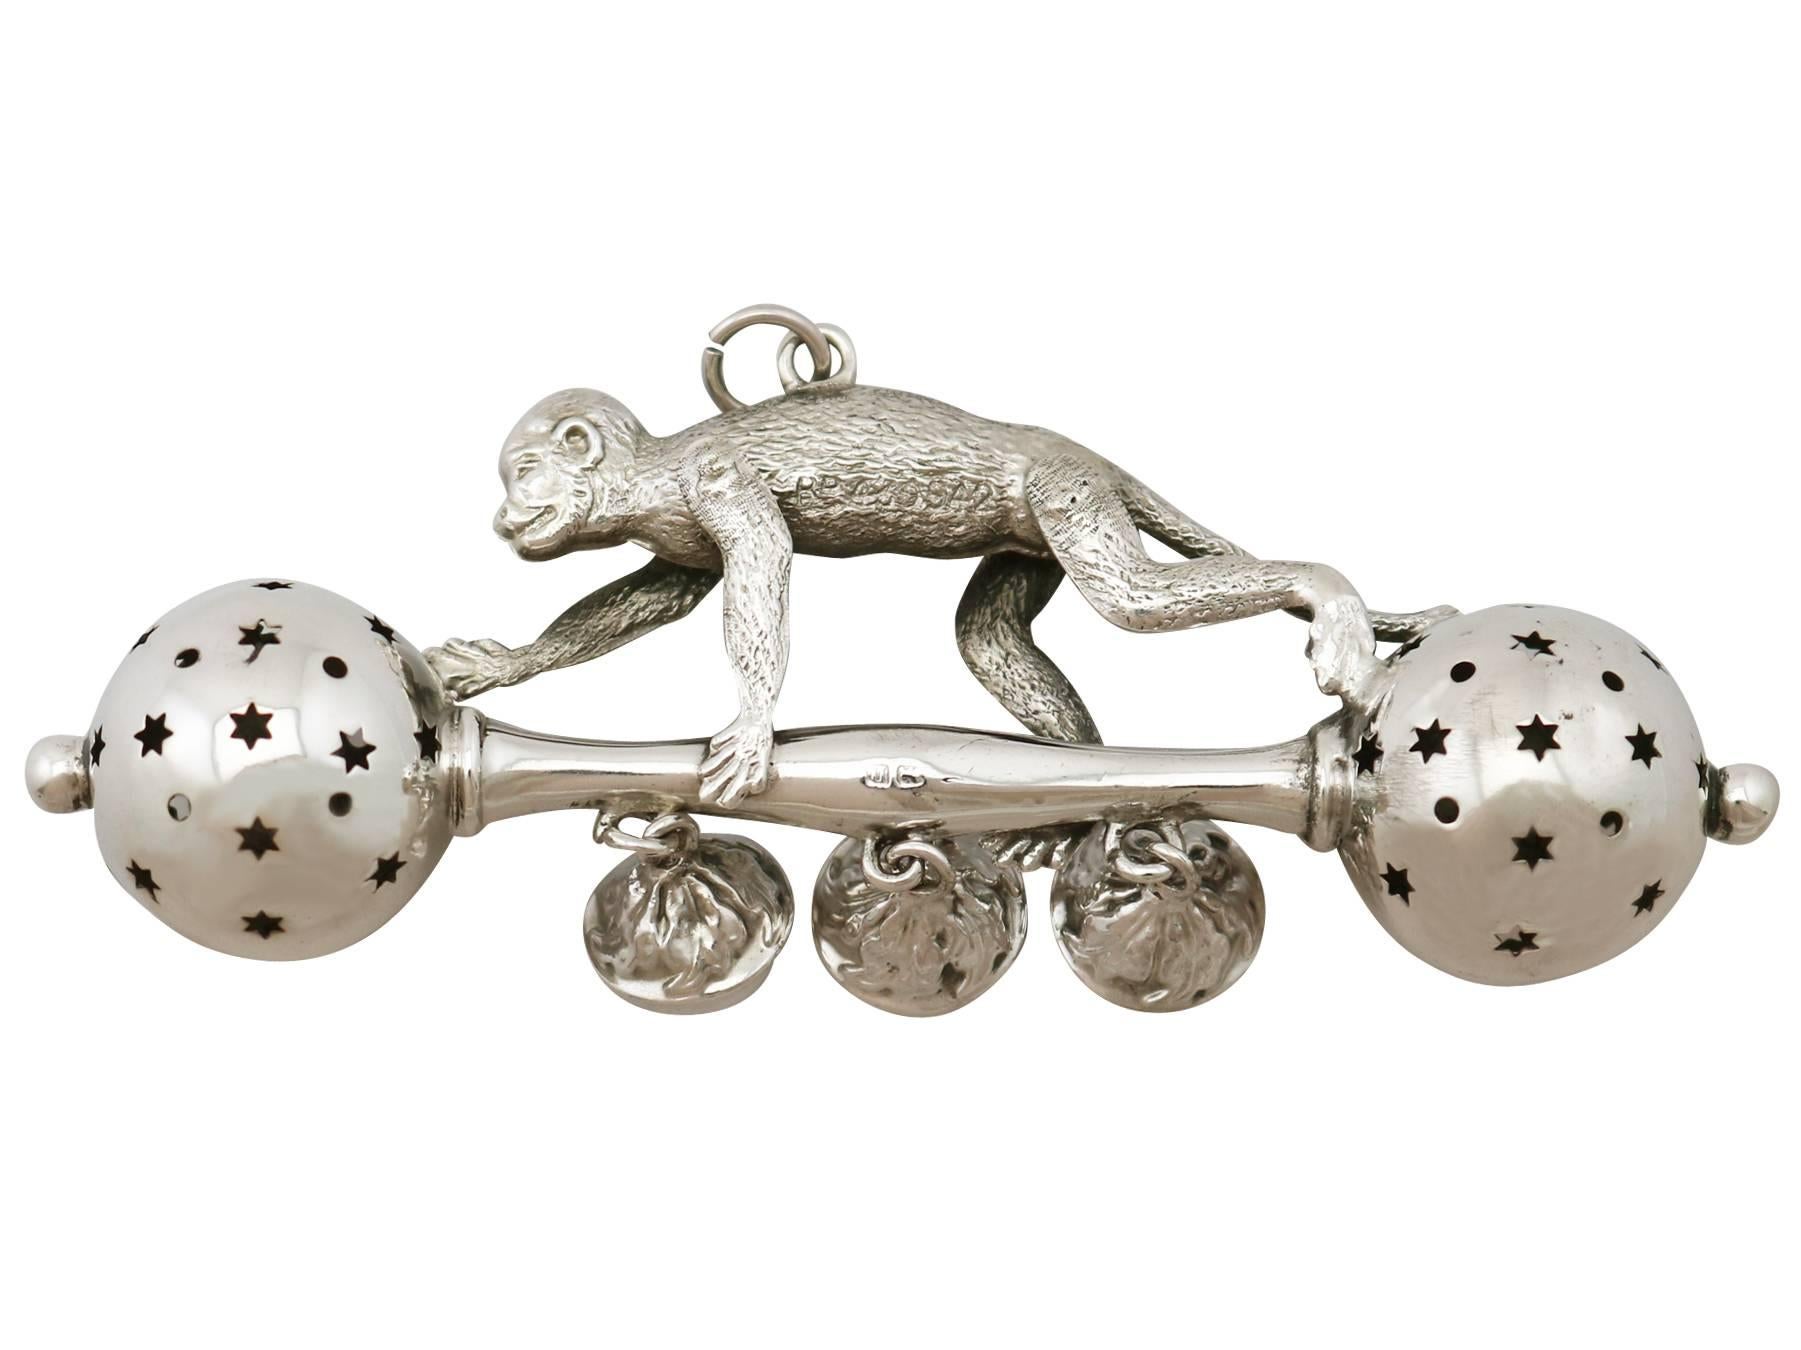 An exceptional, fine and impressive, unusual antique George V sterling silver baby rattle; part of our diverse silverware collection.

This exceptional antique sterling silver baby rattle has a barbell shaped form.

This unusual silver baby rattle